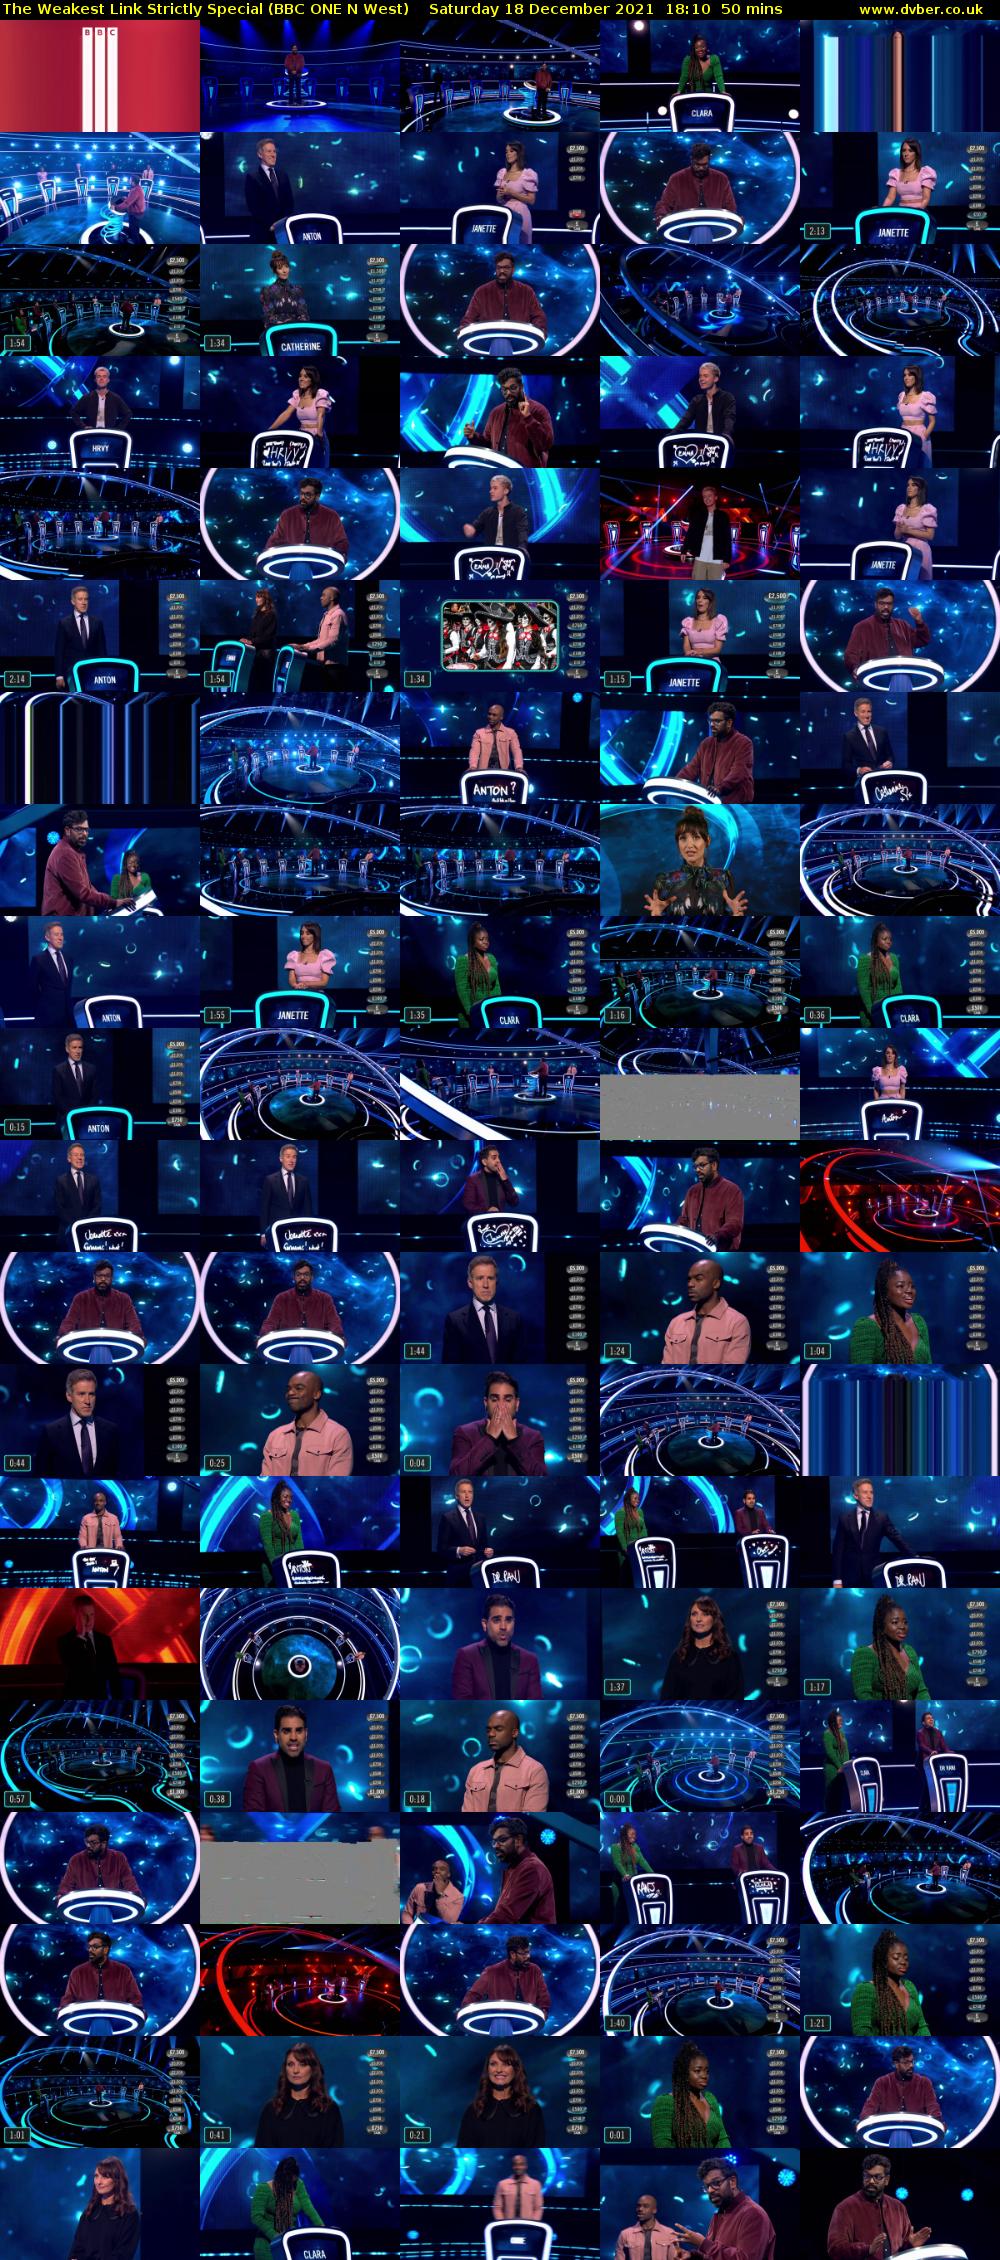 The Weakest Link Strictly Special (BBC ONE N West) Saturday 18 December 2021 18:10 - 19:00